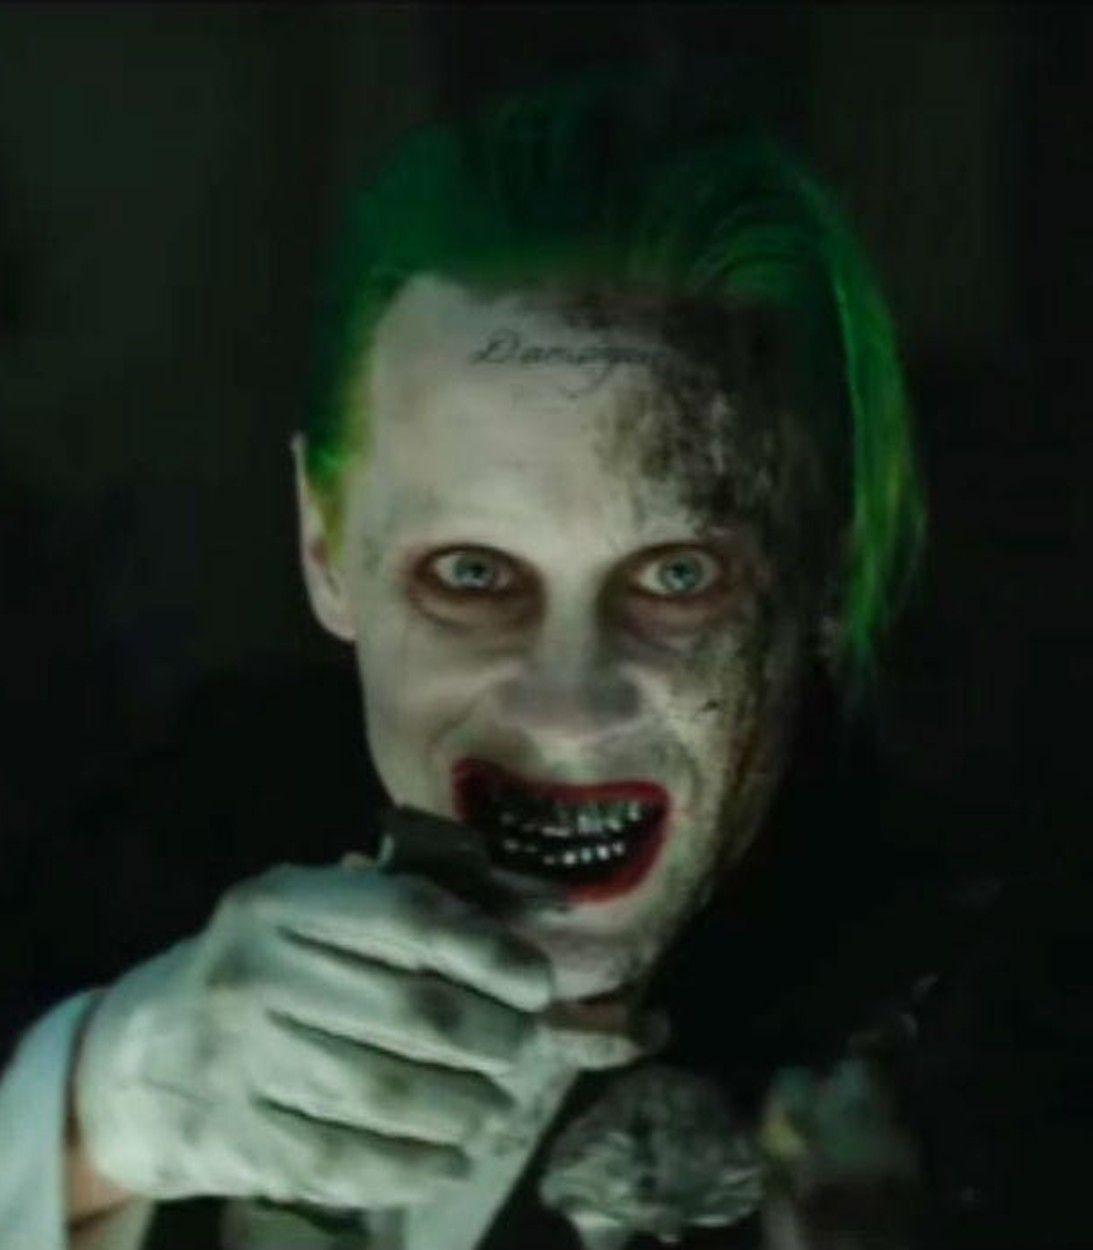 Jared Leto as The Joker cut scene in Suicide Squad pic vertical